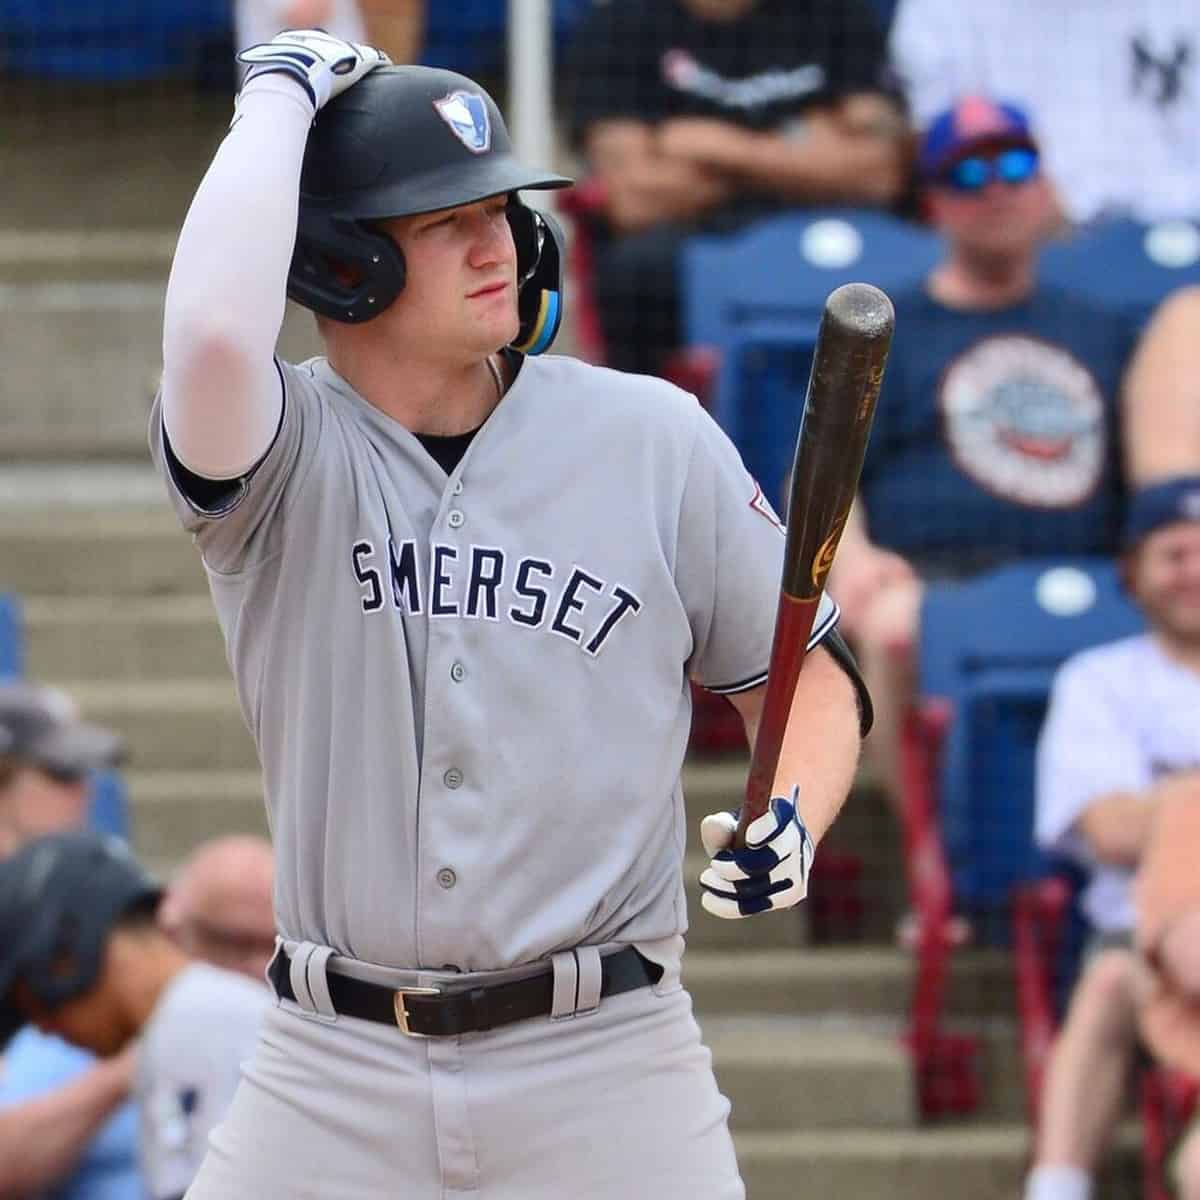 Prized prospect Domínguez homers again as Yankees complete 3-game